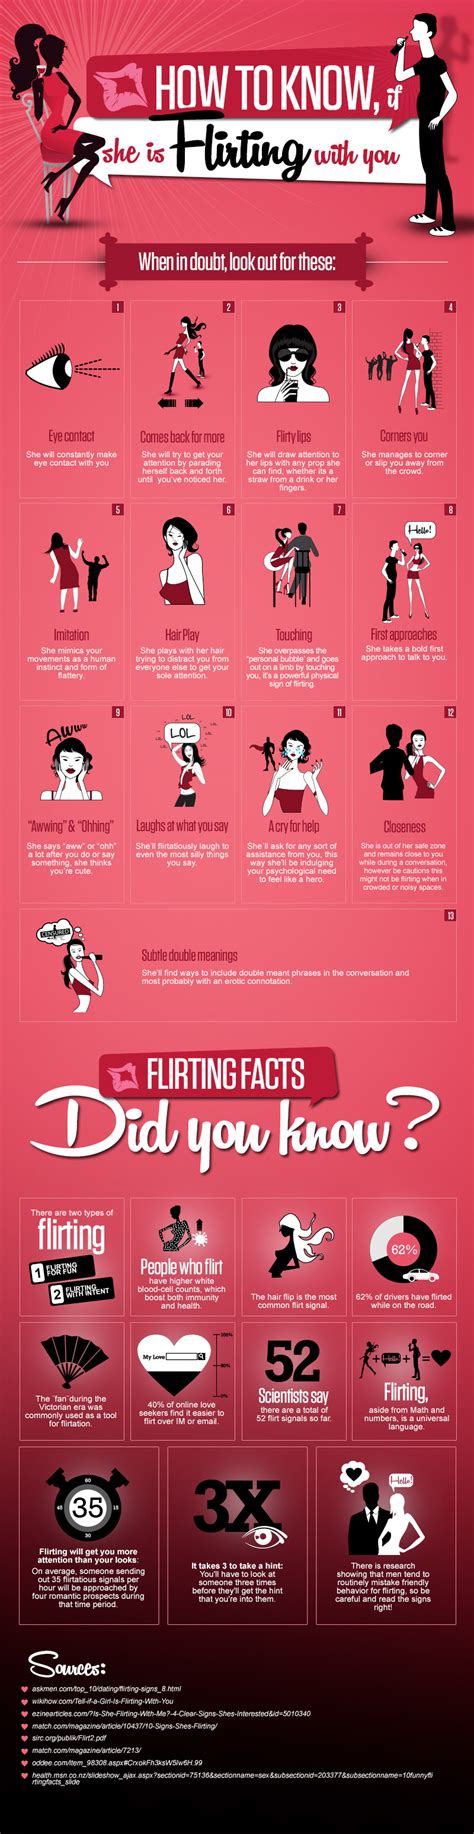 What is the most common flirting style?